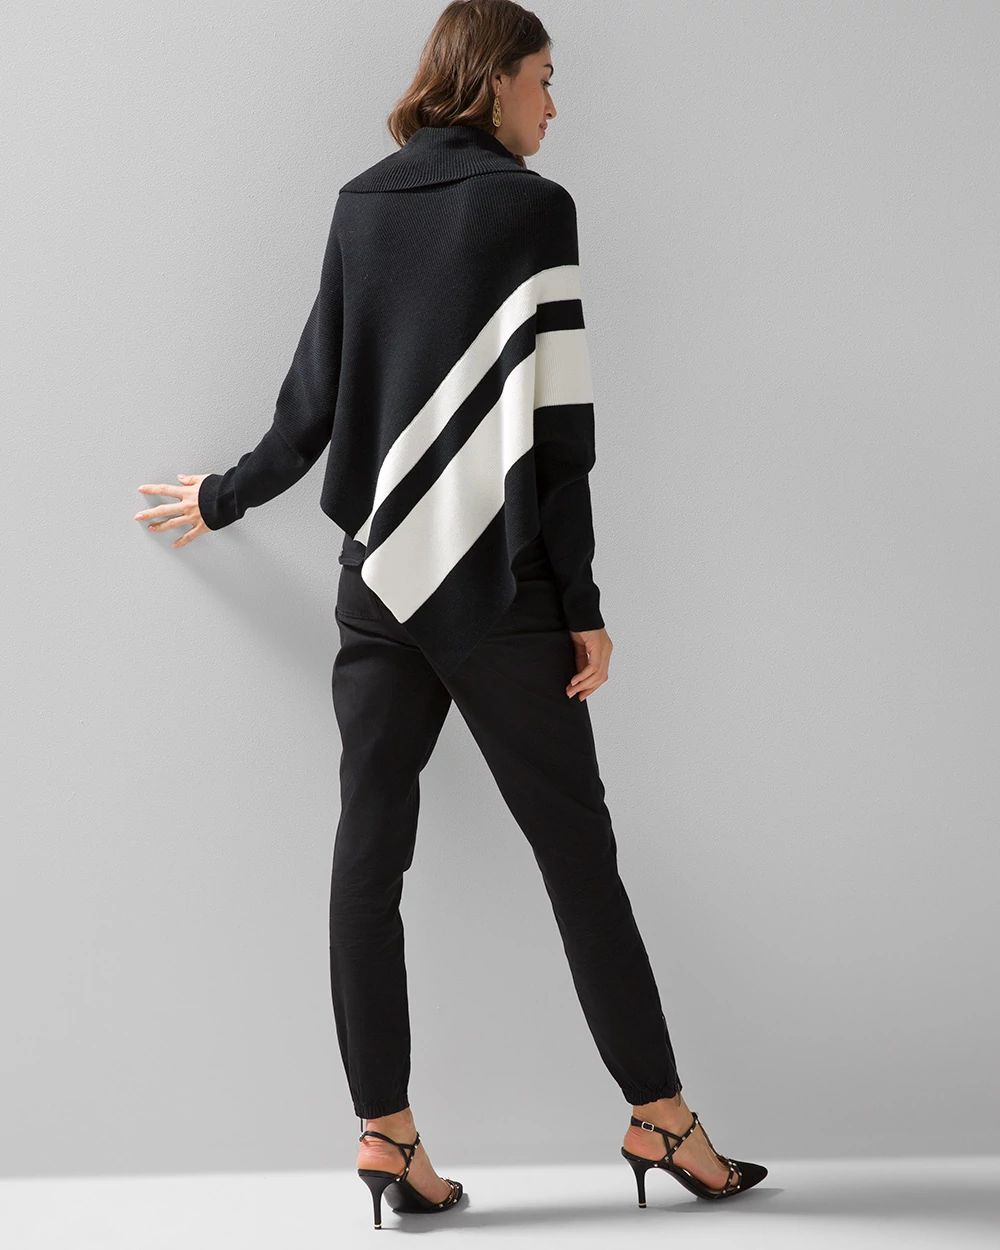 Long-Sleeve Zip-Neck Stripe Poncho click to view larger image.